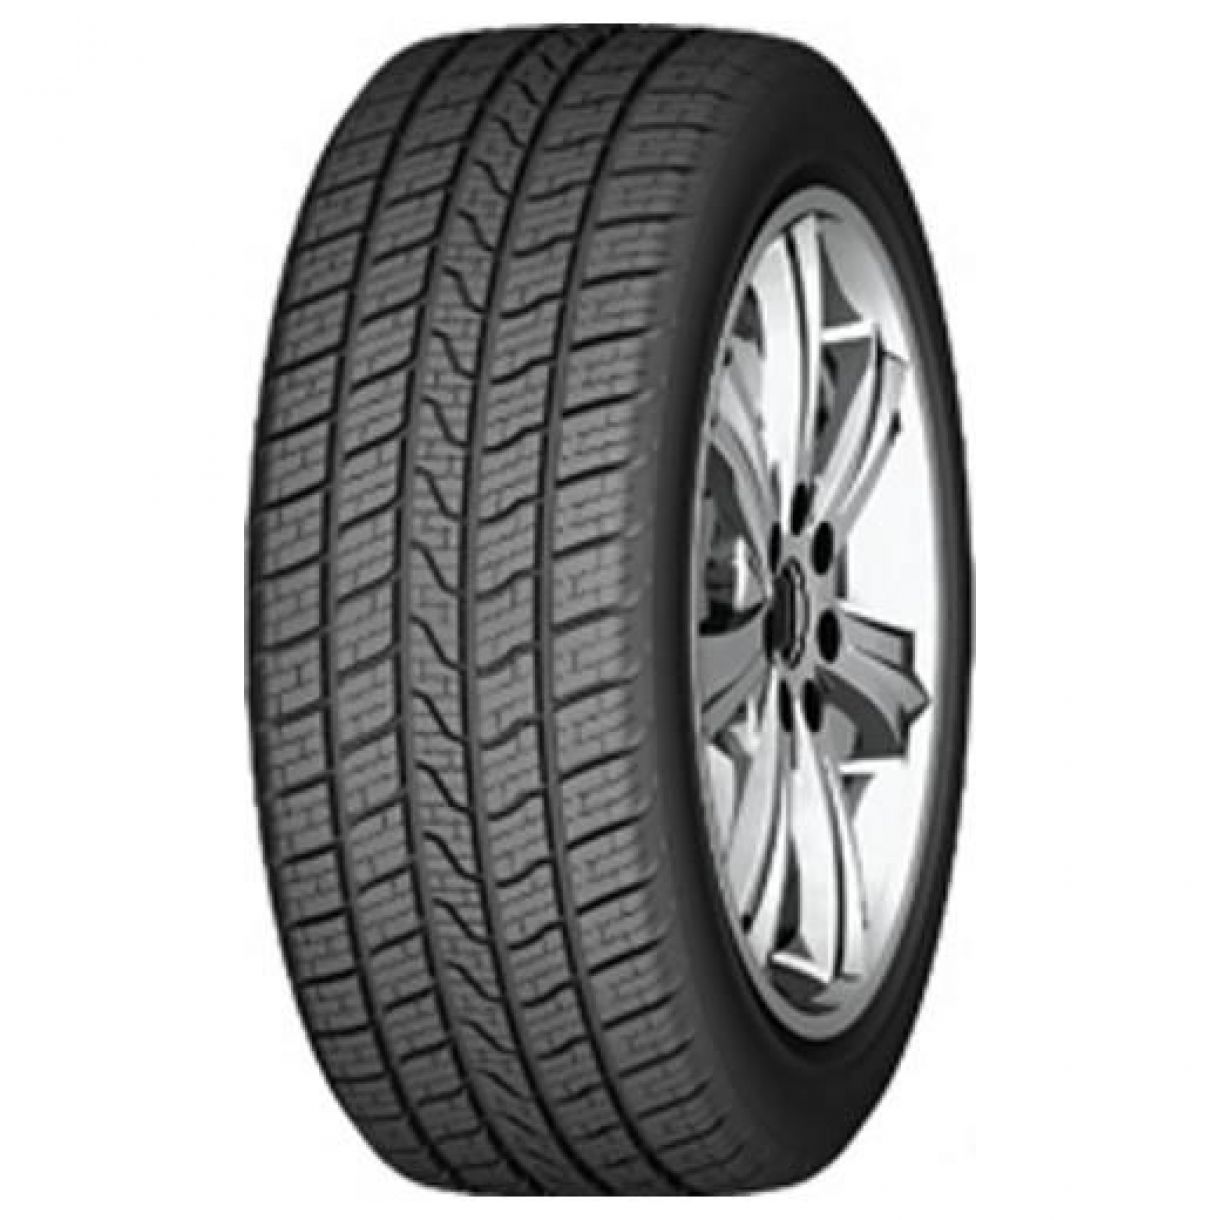 Gomme Nuove Powertrac 175/60 R15 81H POWERMARCH A-S M+S pneumatici nuovi All Season